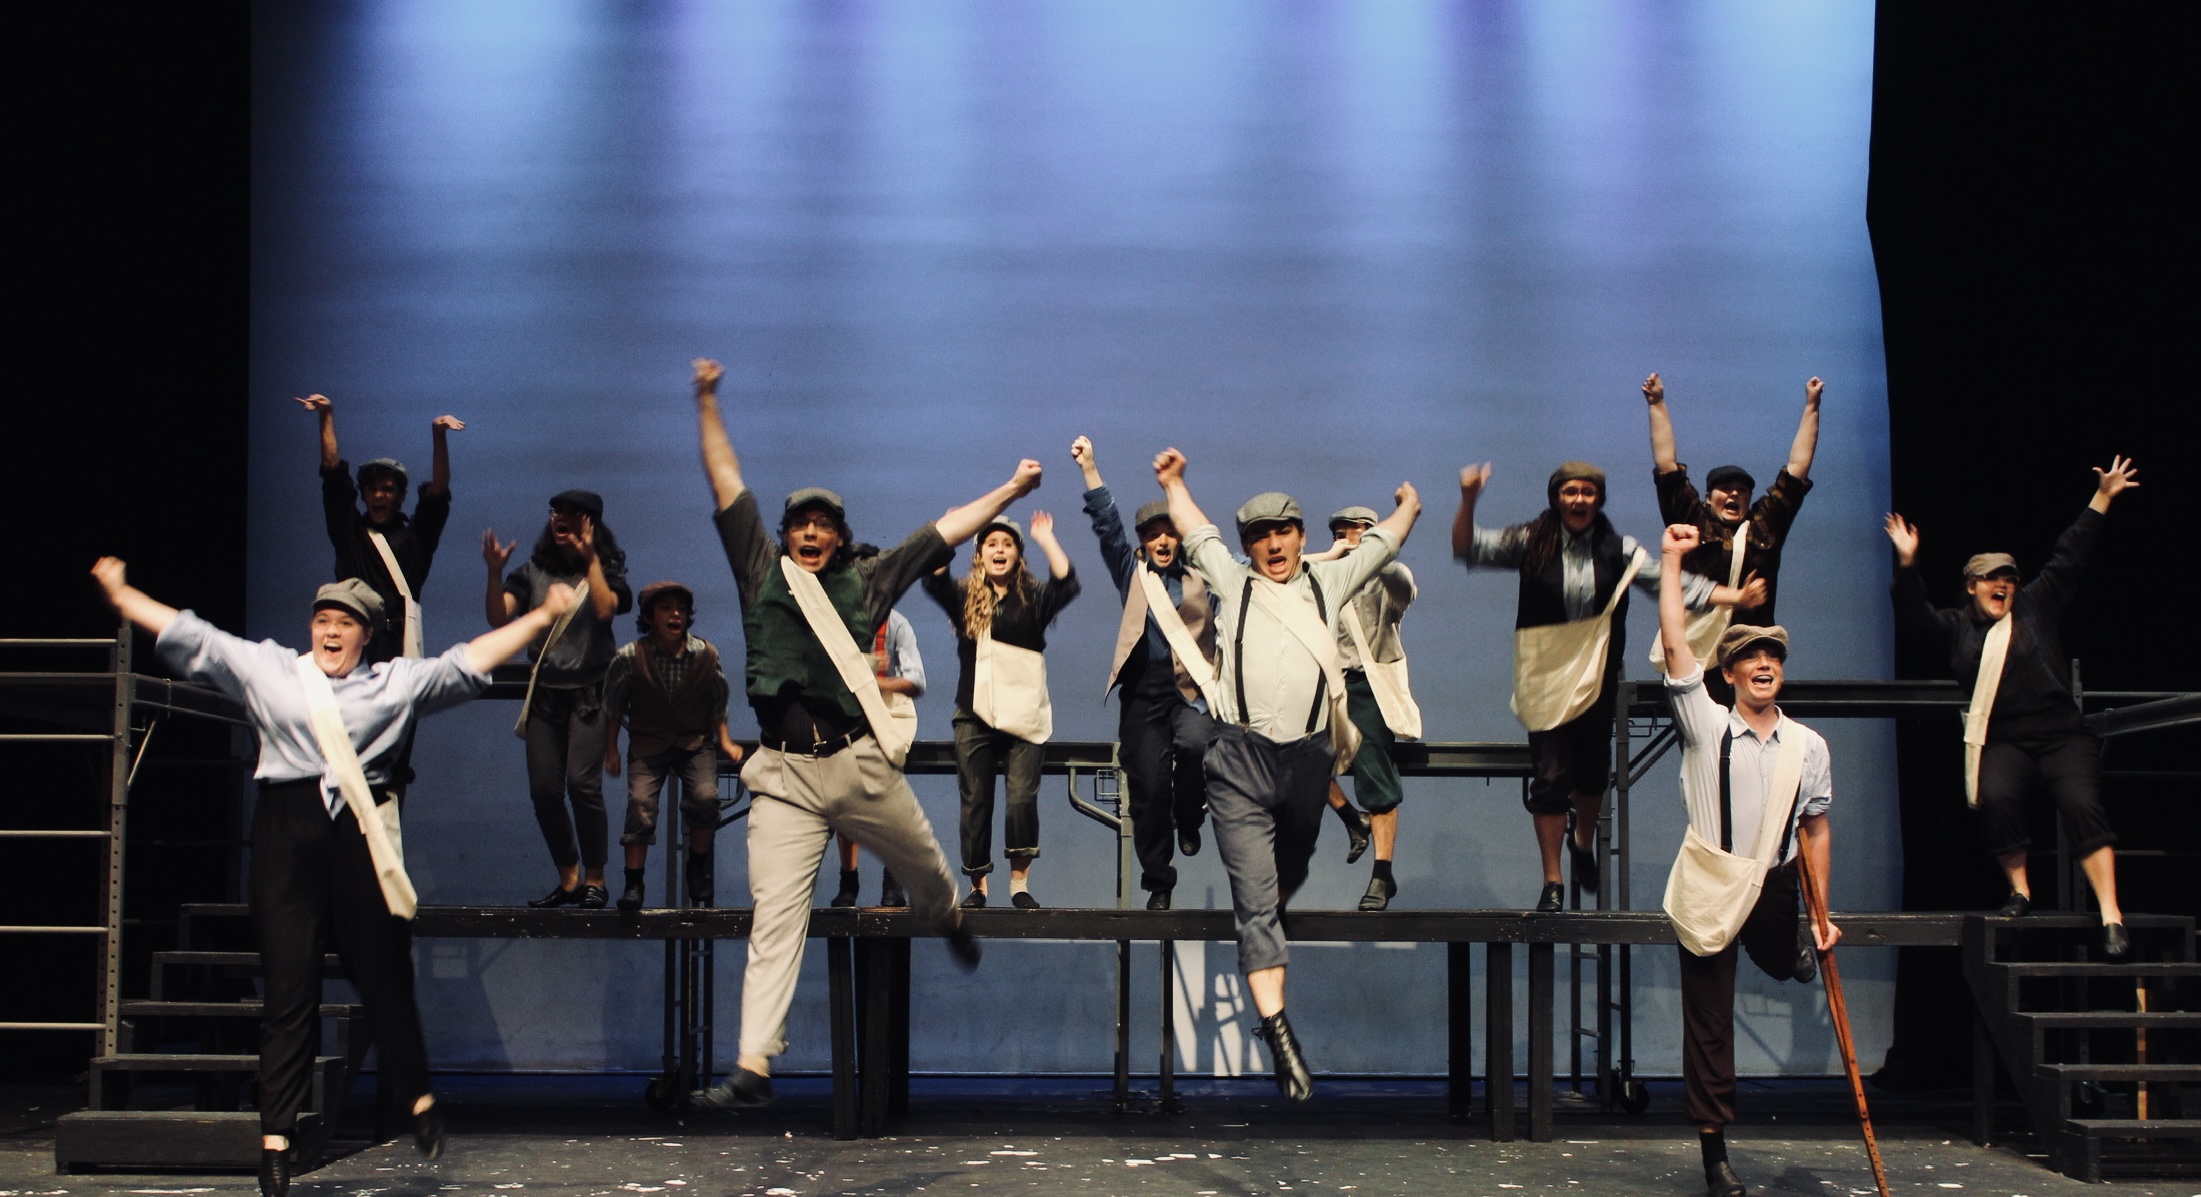 3 – Sunny Side Theater performed Newsies Jr